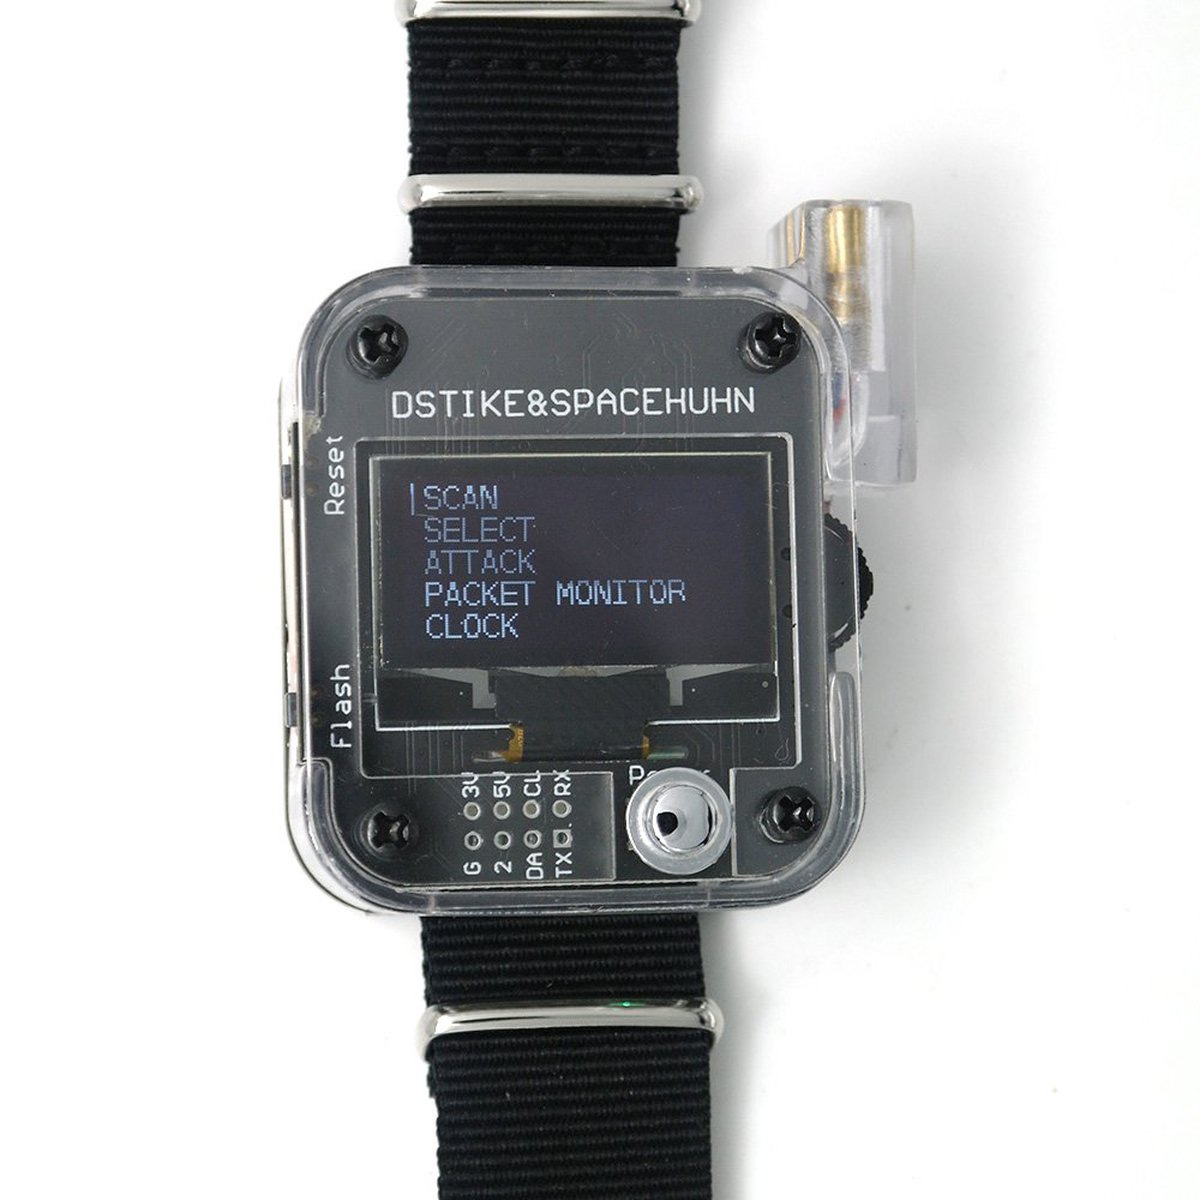 Deauther Watch V3: A smartwatch aimed at hackers and penetration testers -  NotebookCheck.net News